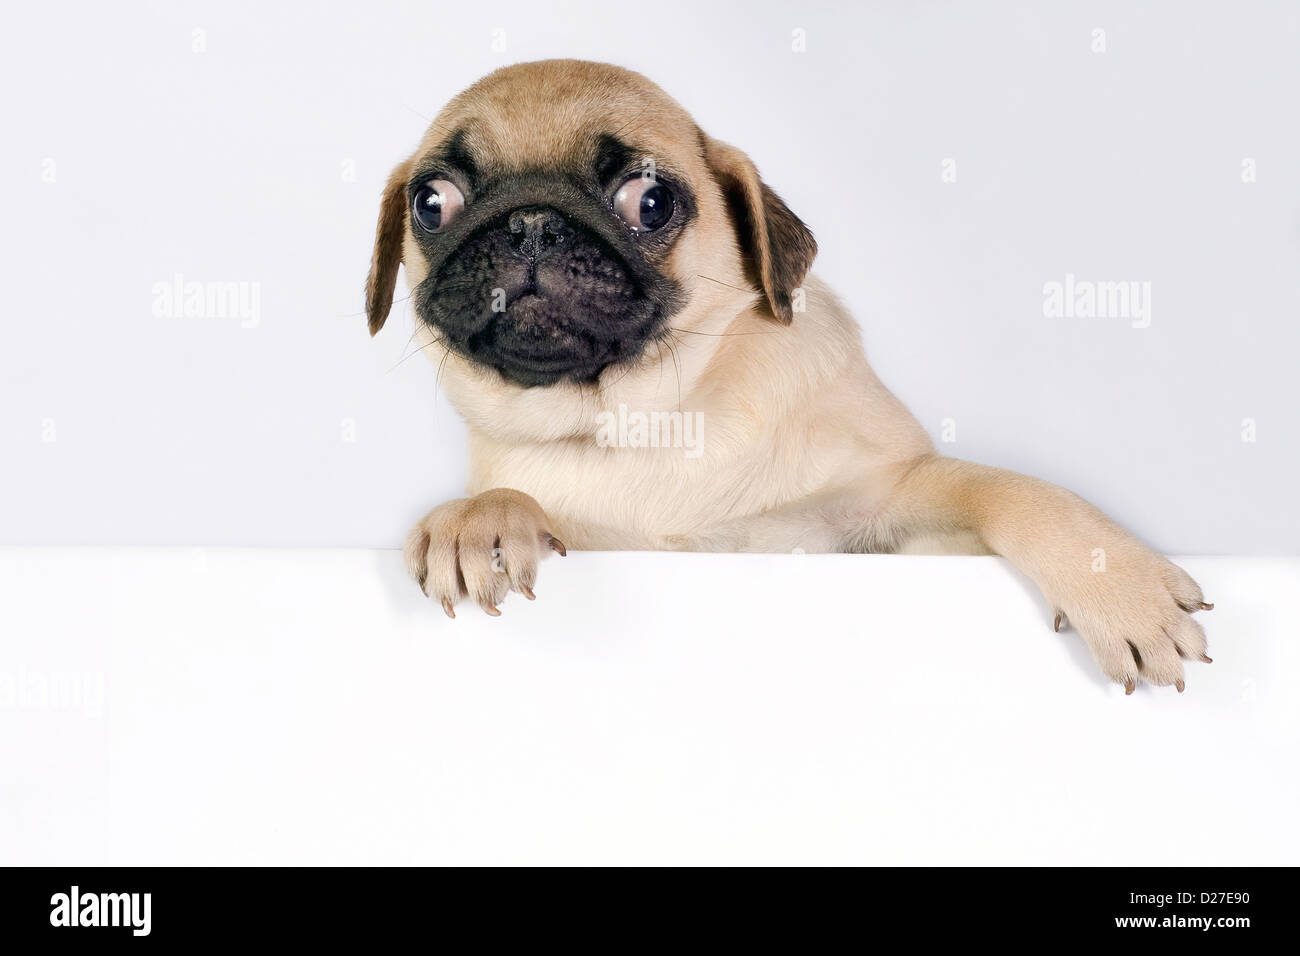 Cute Pug puppy on white background with space for text. Stock Photo